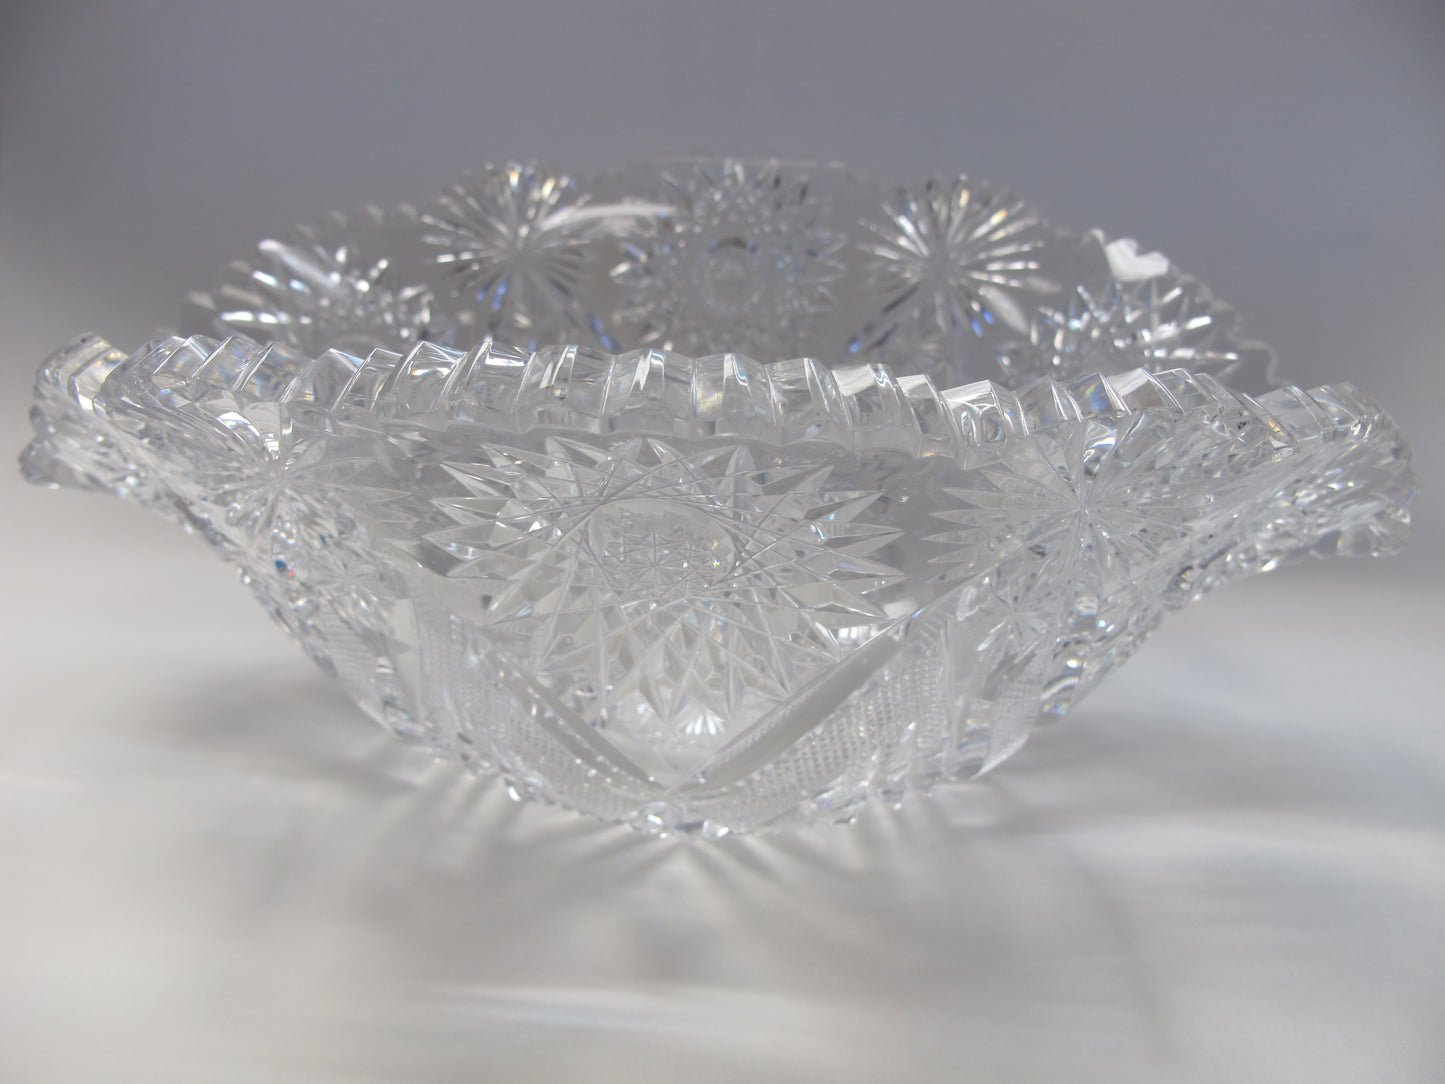 Straus ABP cut glass bowl Napoleon Hat shape American brilliant blown blank - O'Rourke crystal awards & gifts abp cut glass